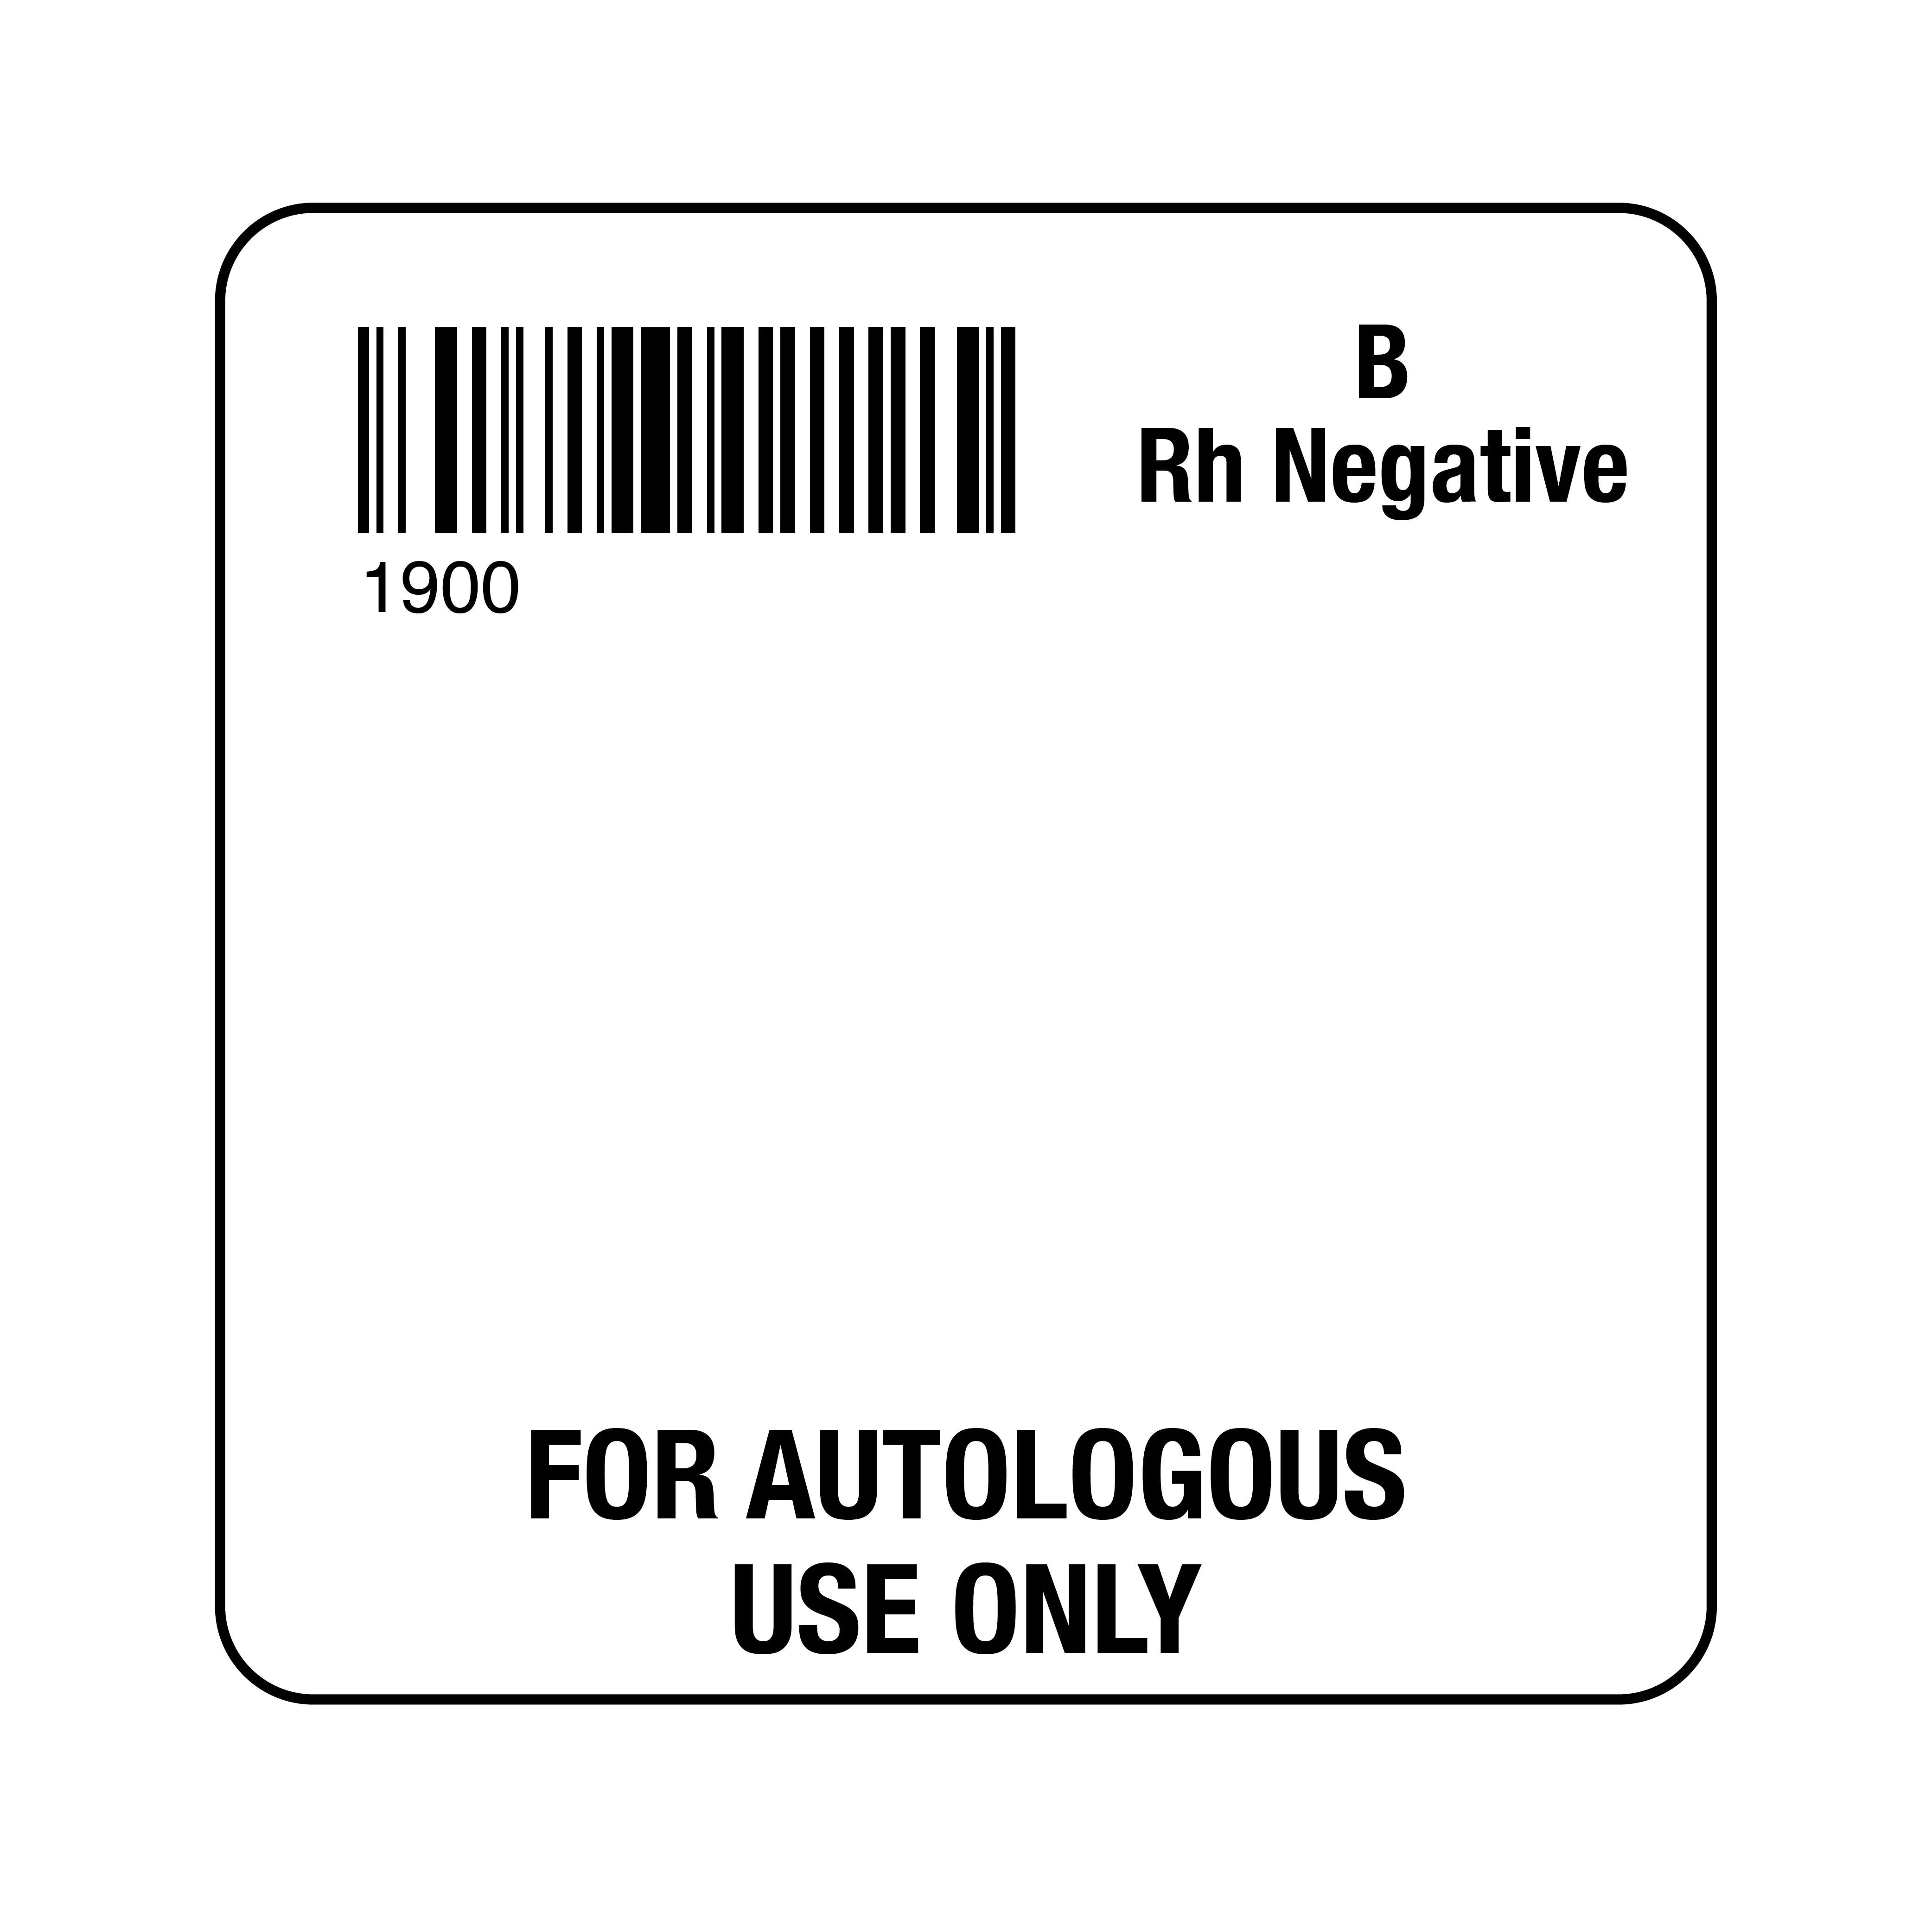 ISBT 128 B Rh Negative For Autologous Use Only